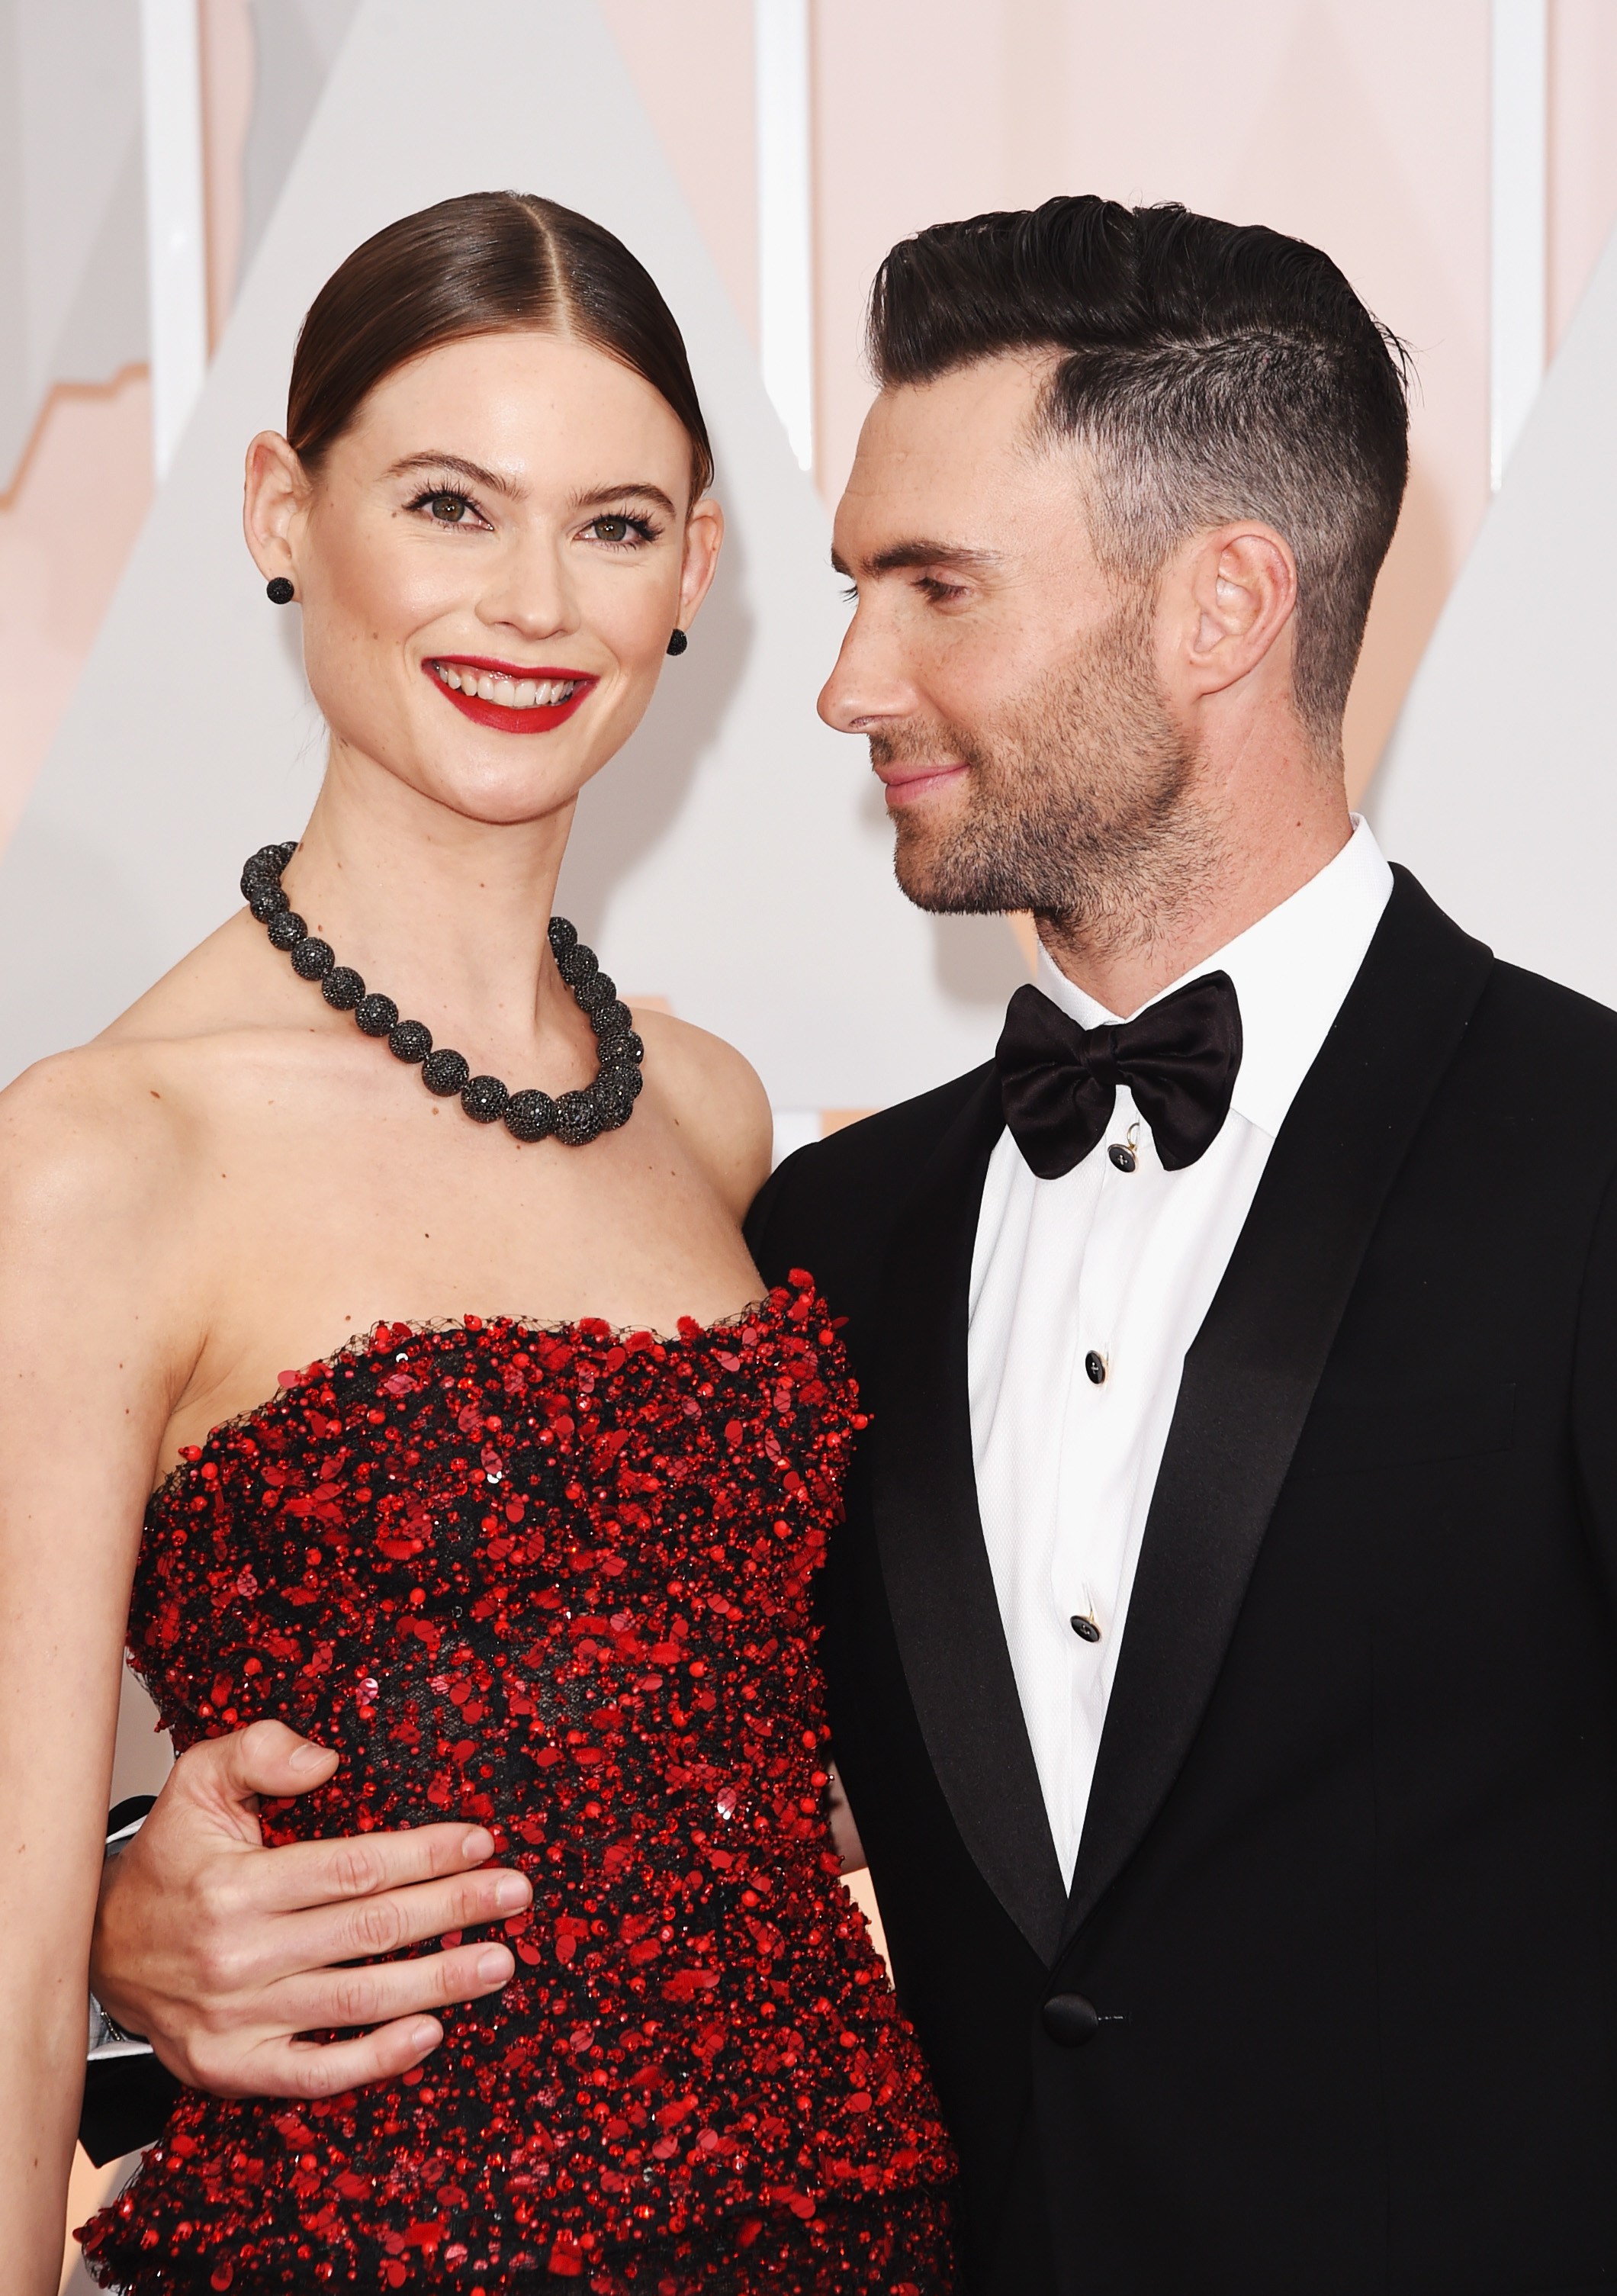 Adam smiling at Behati and wearing a bow tie